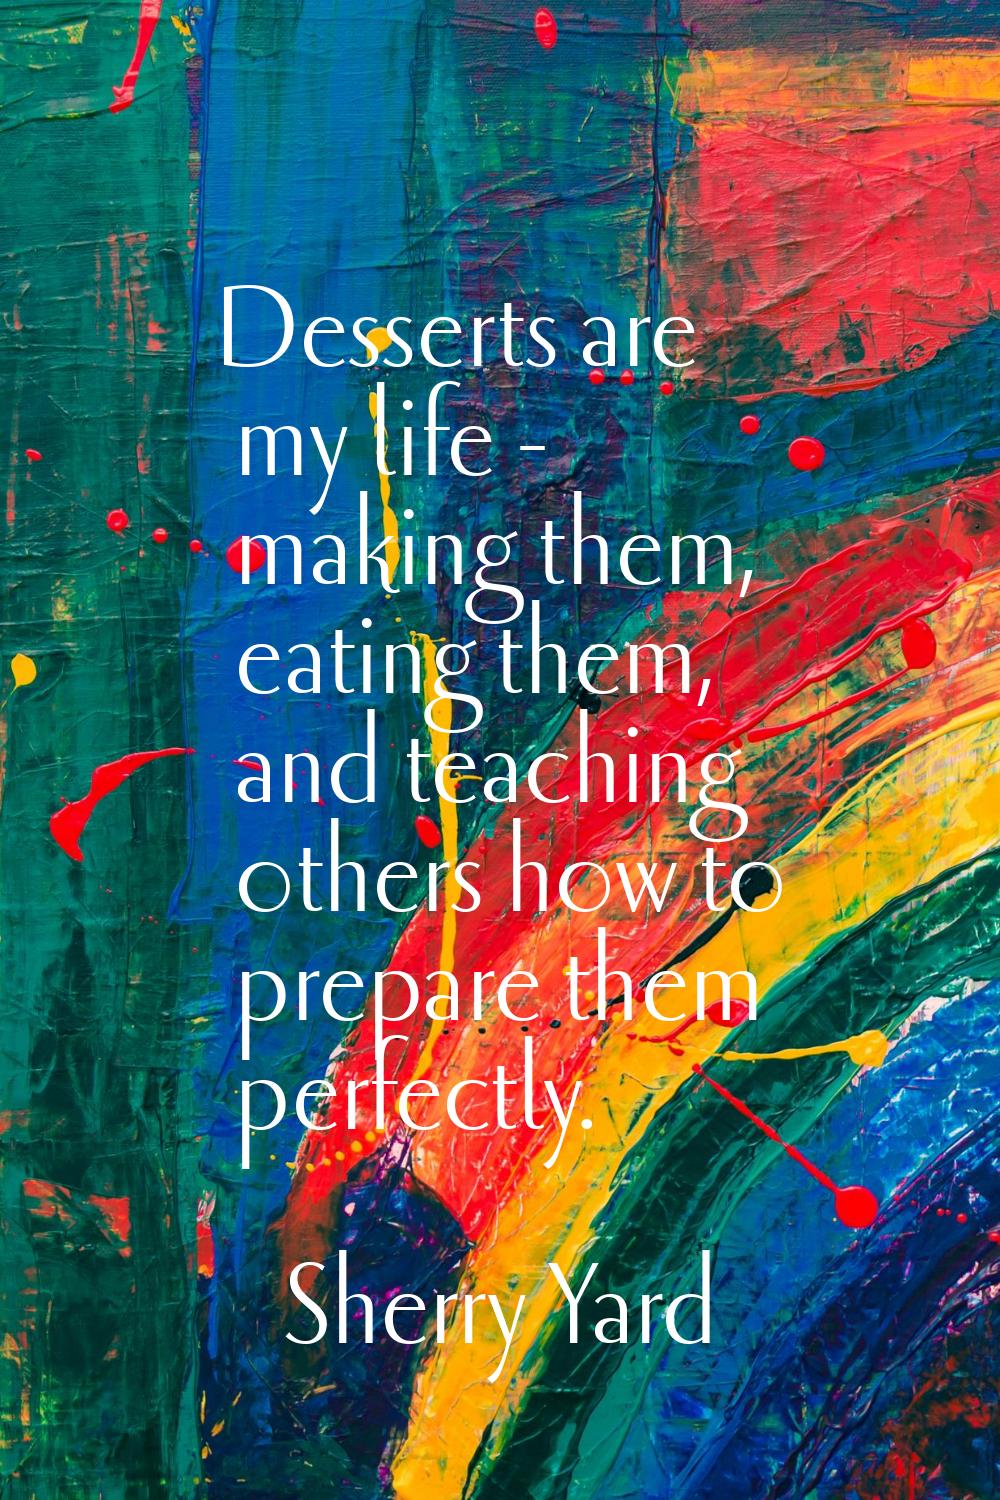 Desserts are my life - making them, eating them, and teaching others how to prepare them perfectly.